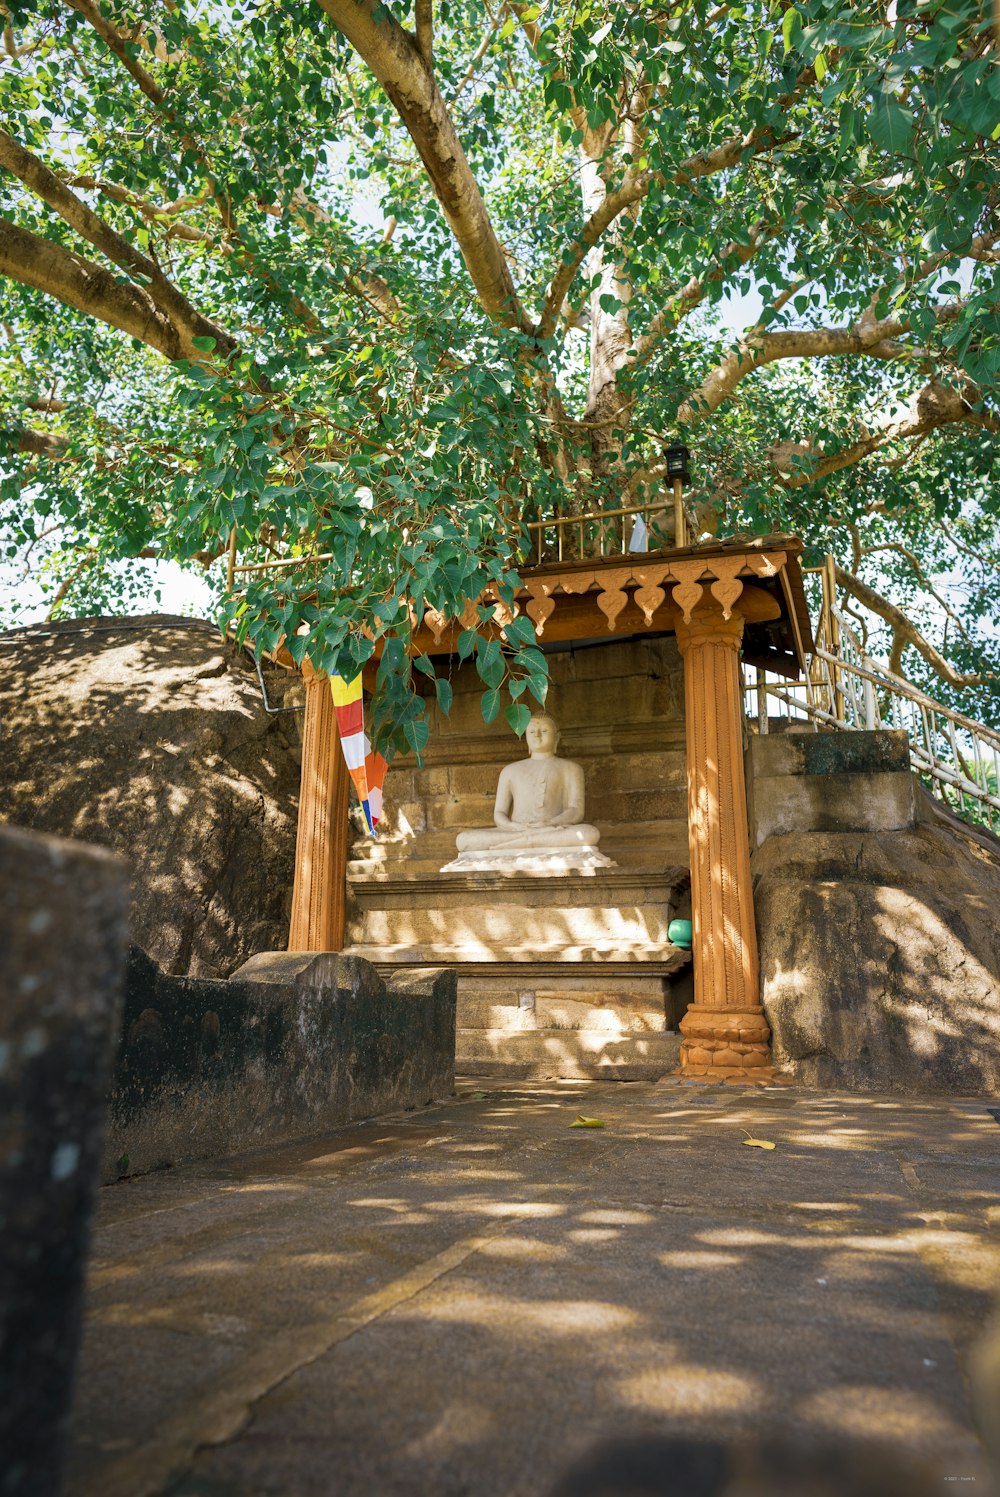 a small shrine under a tree in the shade